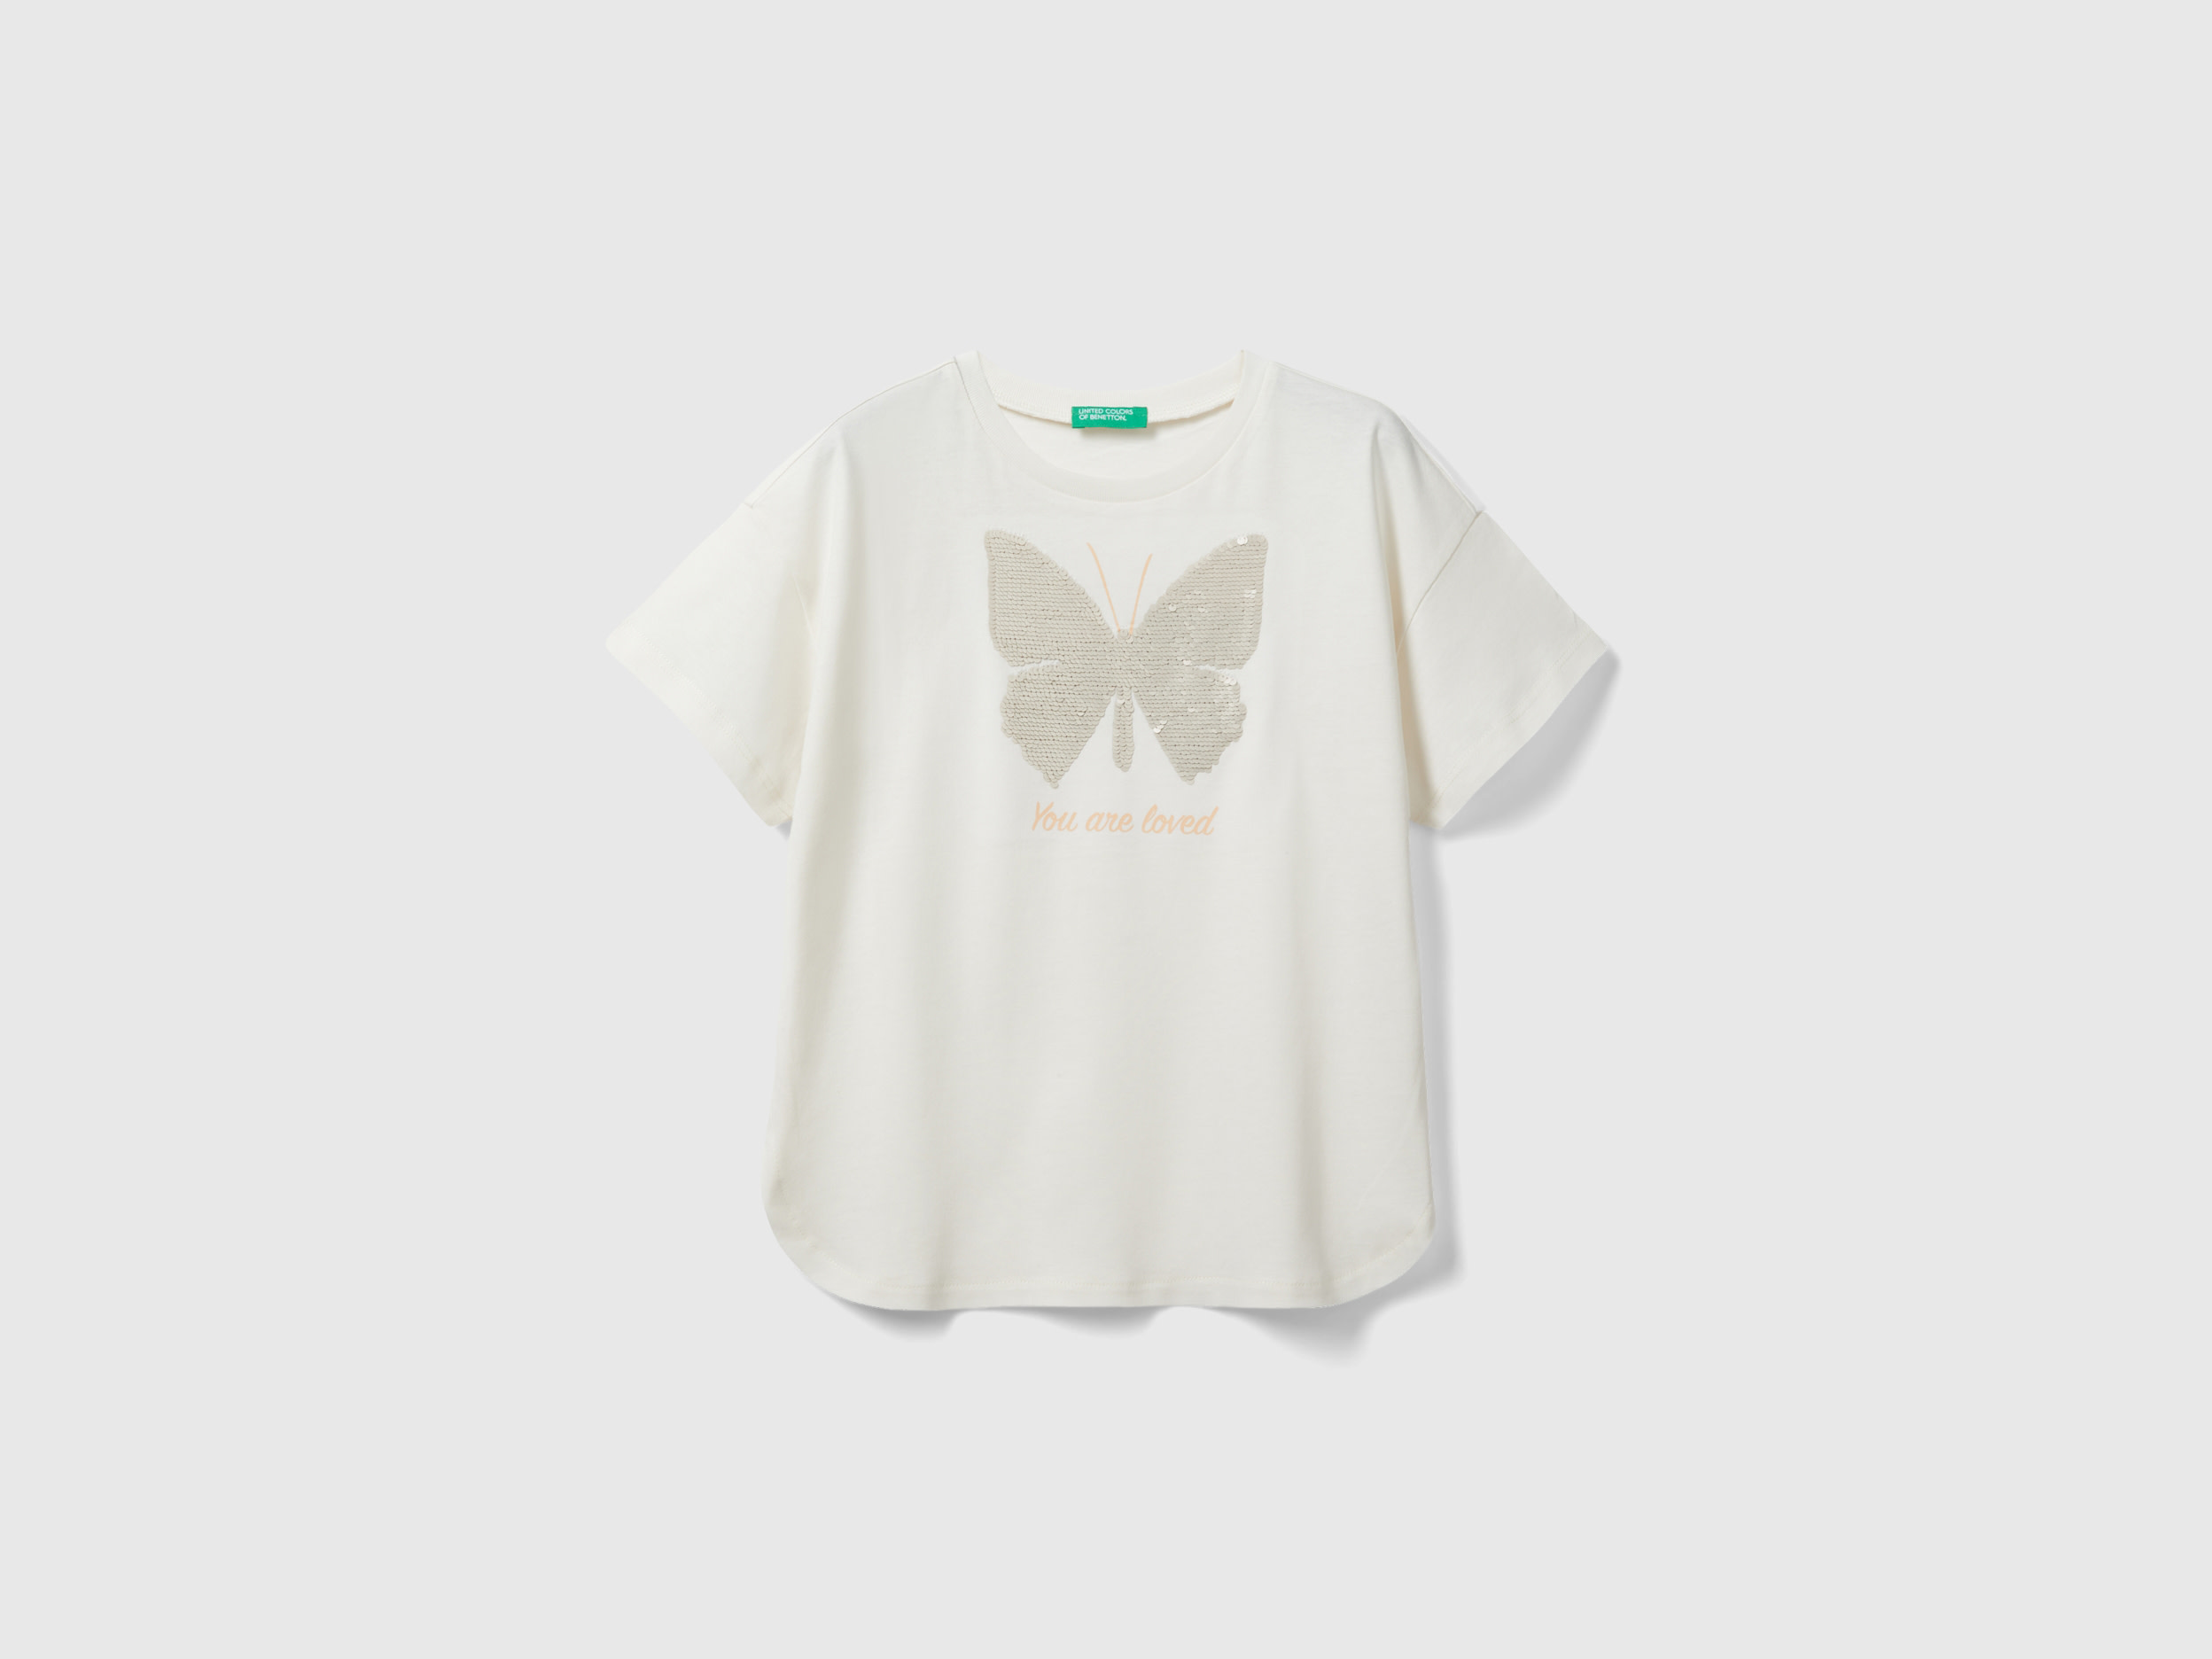 Image of Benetton, T-shirt With Reversible Sequins, size XL, Creamy White, Kids